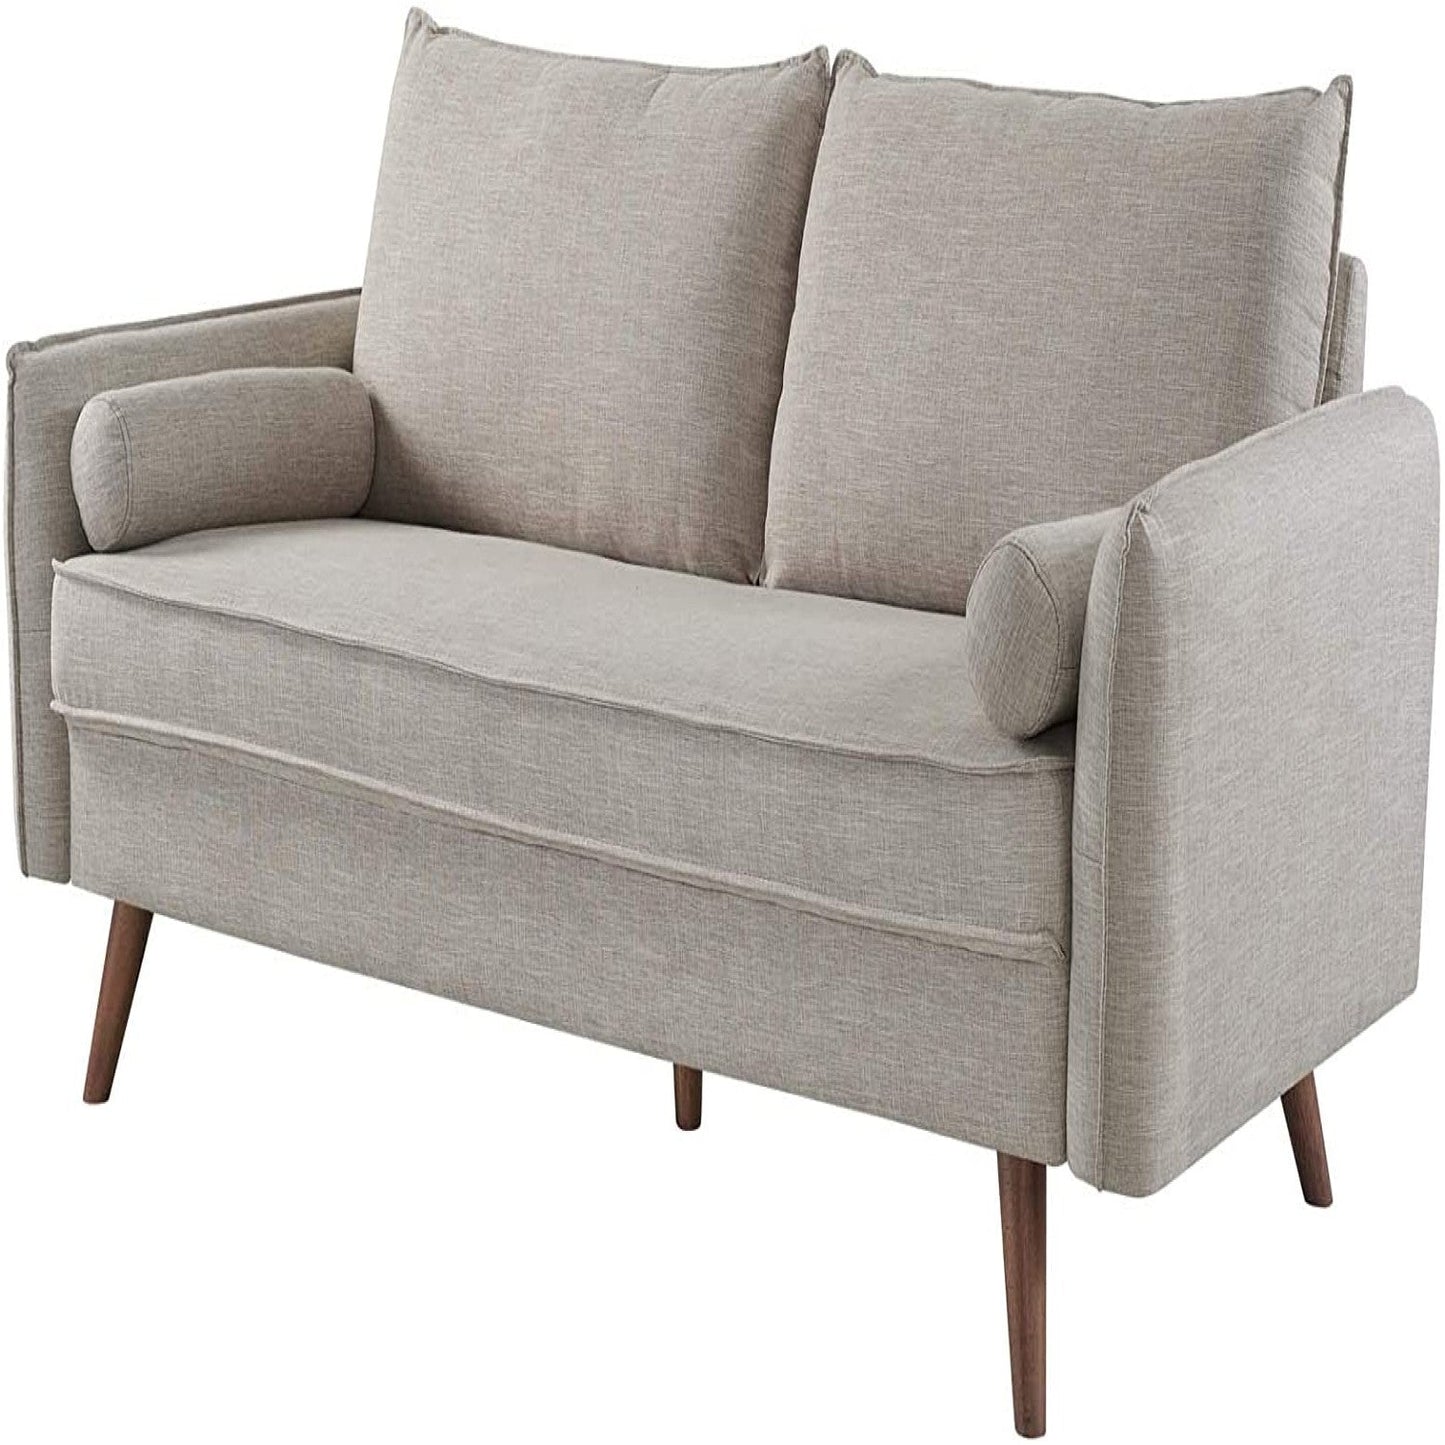 Living Room > Sofas - Modern Couch Beige Upholstered Sofa With With Mid-Century Style Wood Legs